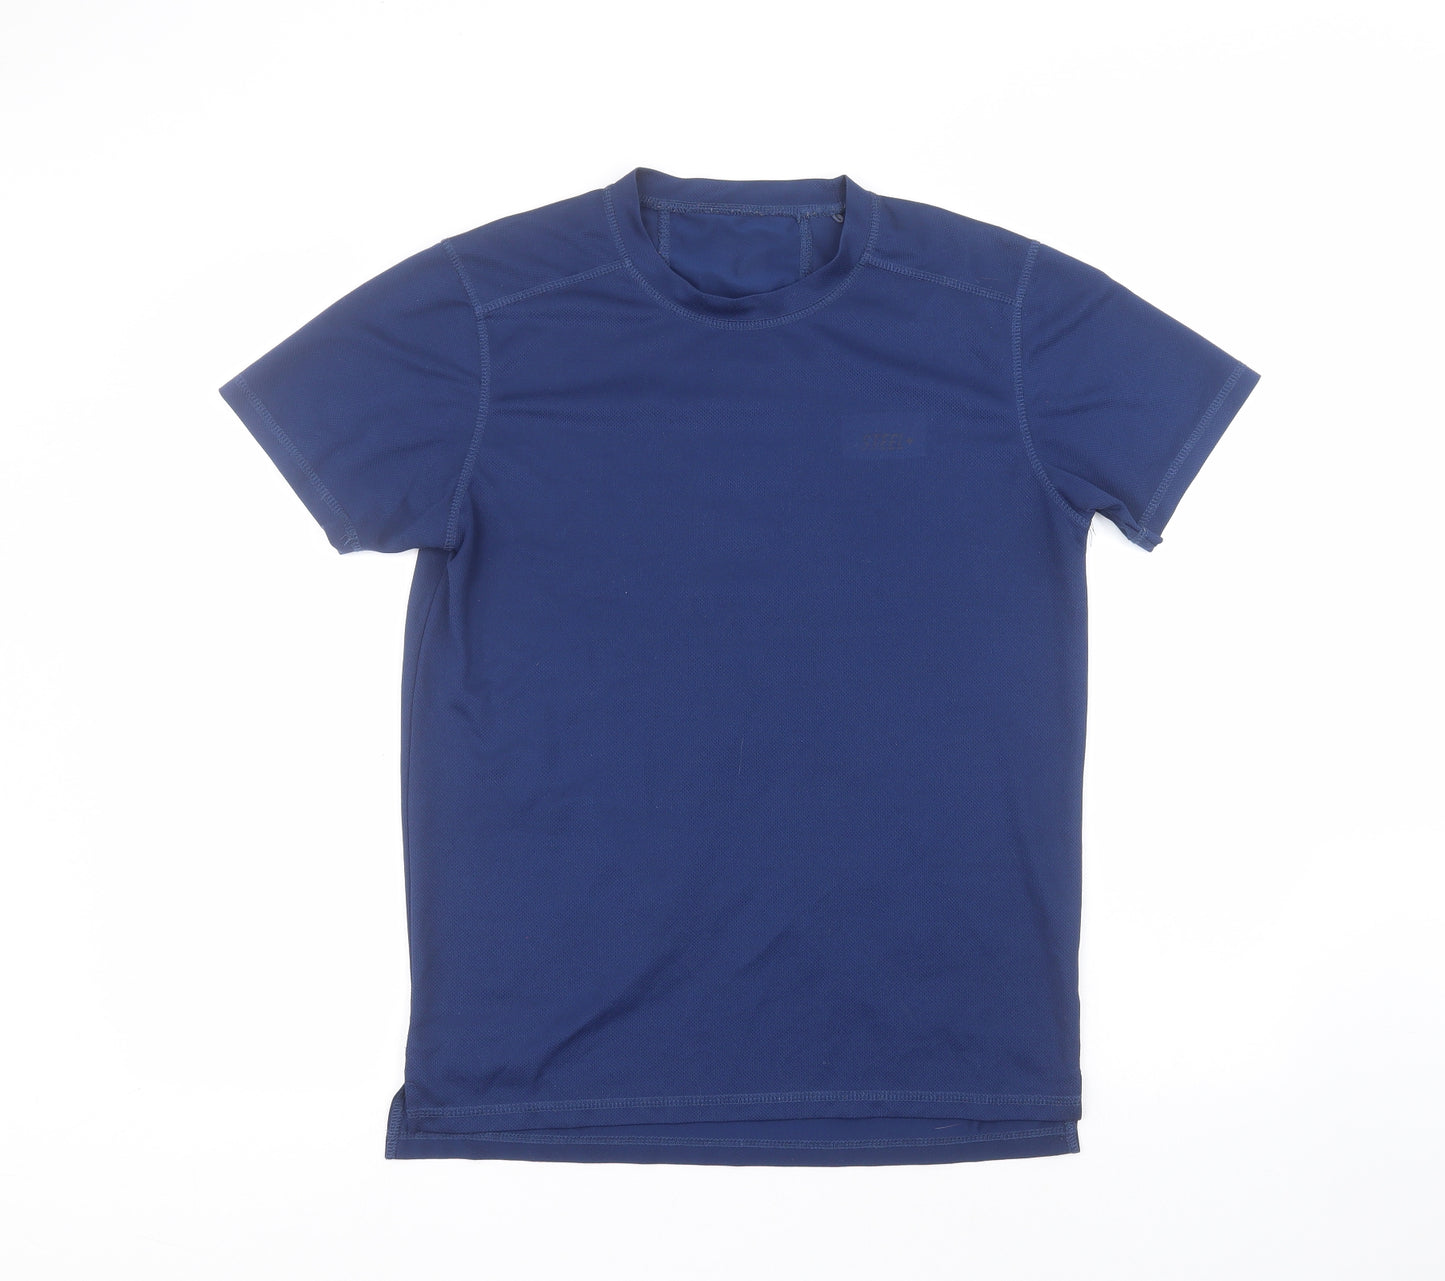 Steel & Jelly Mens Blue  Polyester  T-Shirt Size M Round Neck